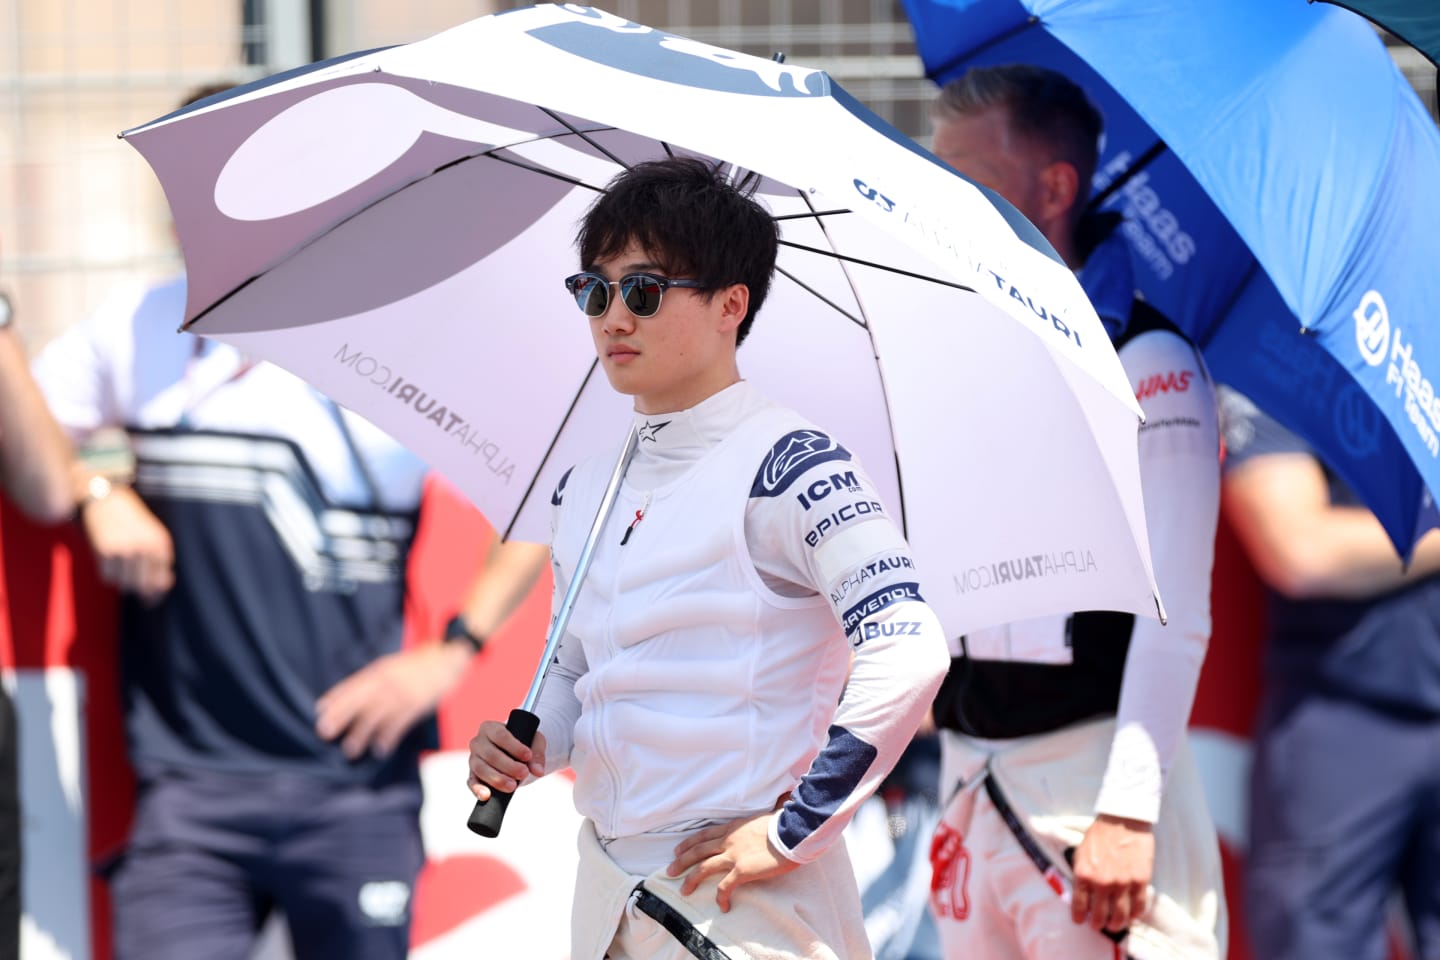 LE CASTELLET, FRANCE - JULY 24: Yuki Tsunoda of Japan and Scuderia AlphaTauri stands for the national anthem on the grid during the F1 Grand Prix of France at Circuit Paul Ricard on July 24, 2022 in Le Castellet, France. (Photo by Peter Fox/Getty Images)